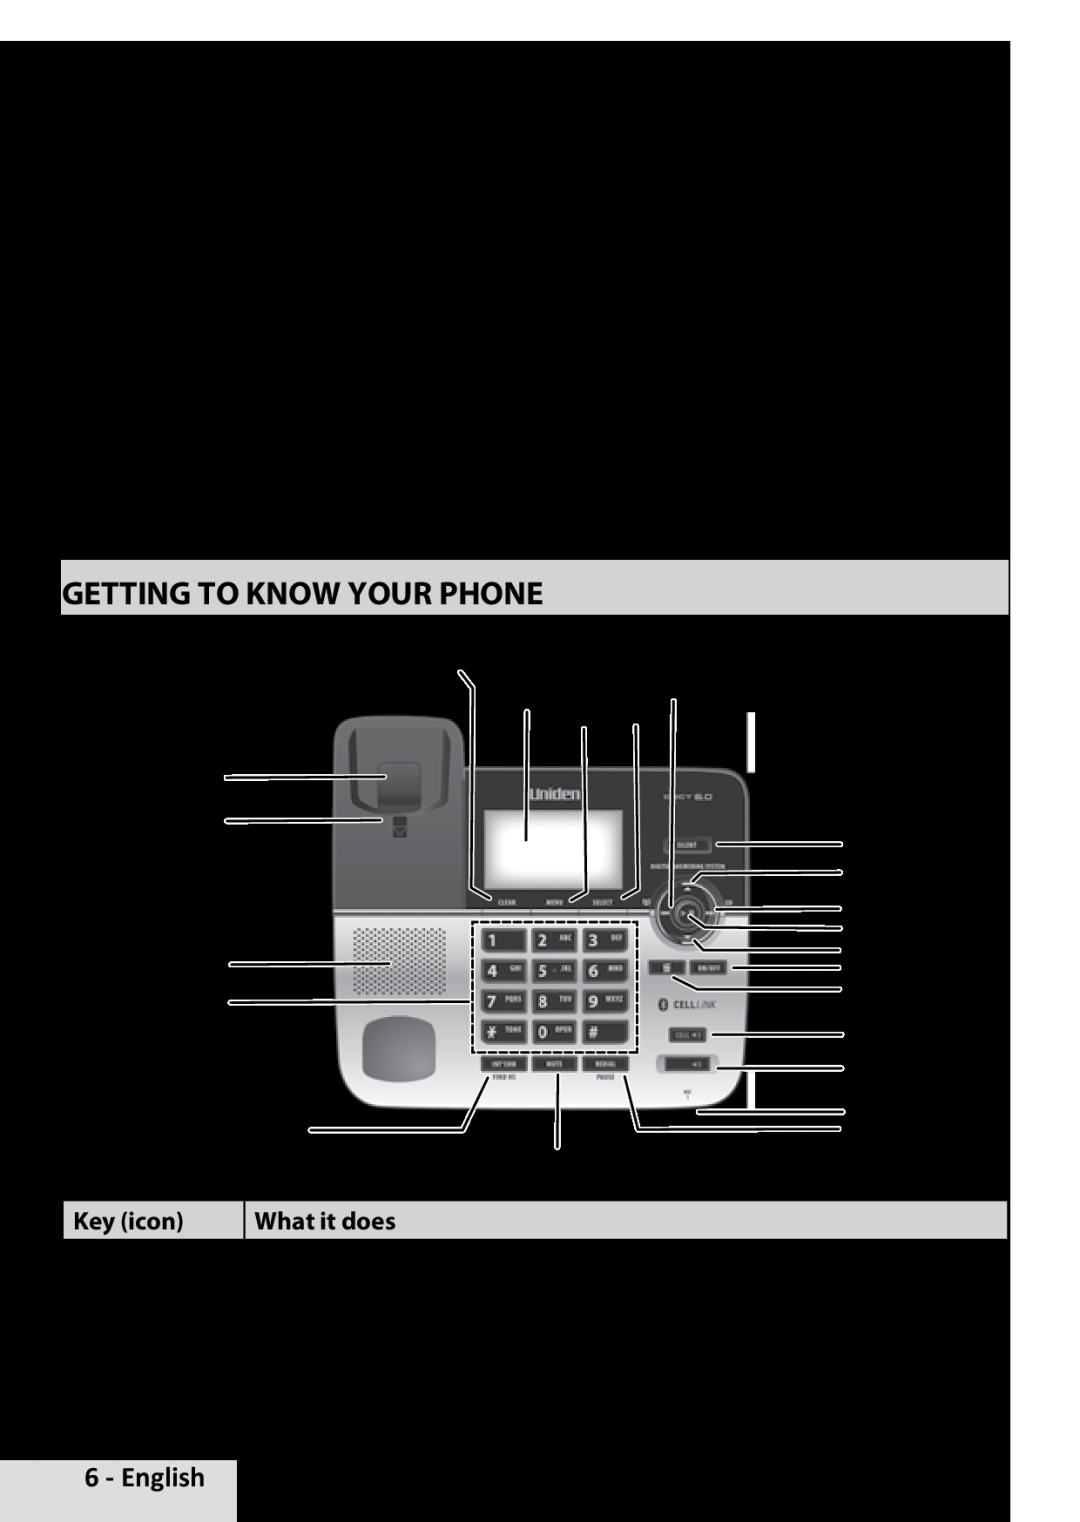 Uniden D1789-2 Getting to Know Your Phone, Parts of the Base, English, Using the D1789 with multiple Bluetooth phones 